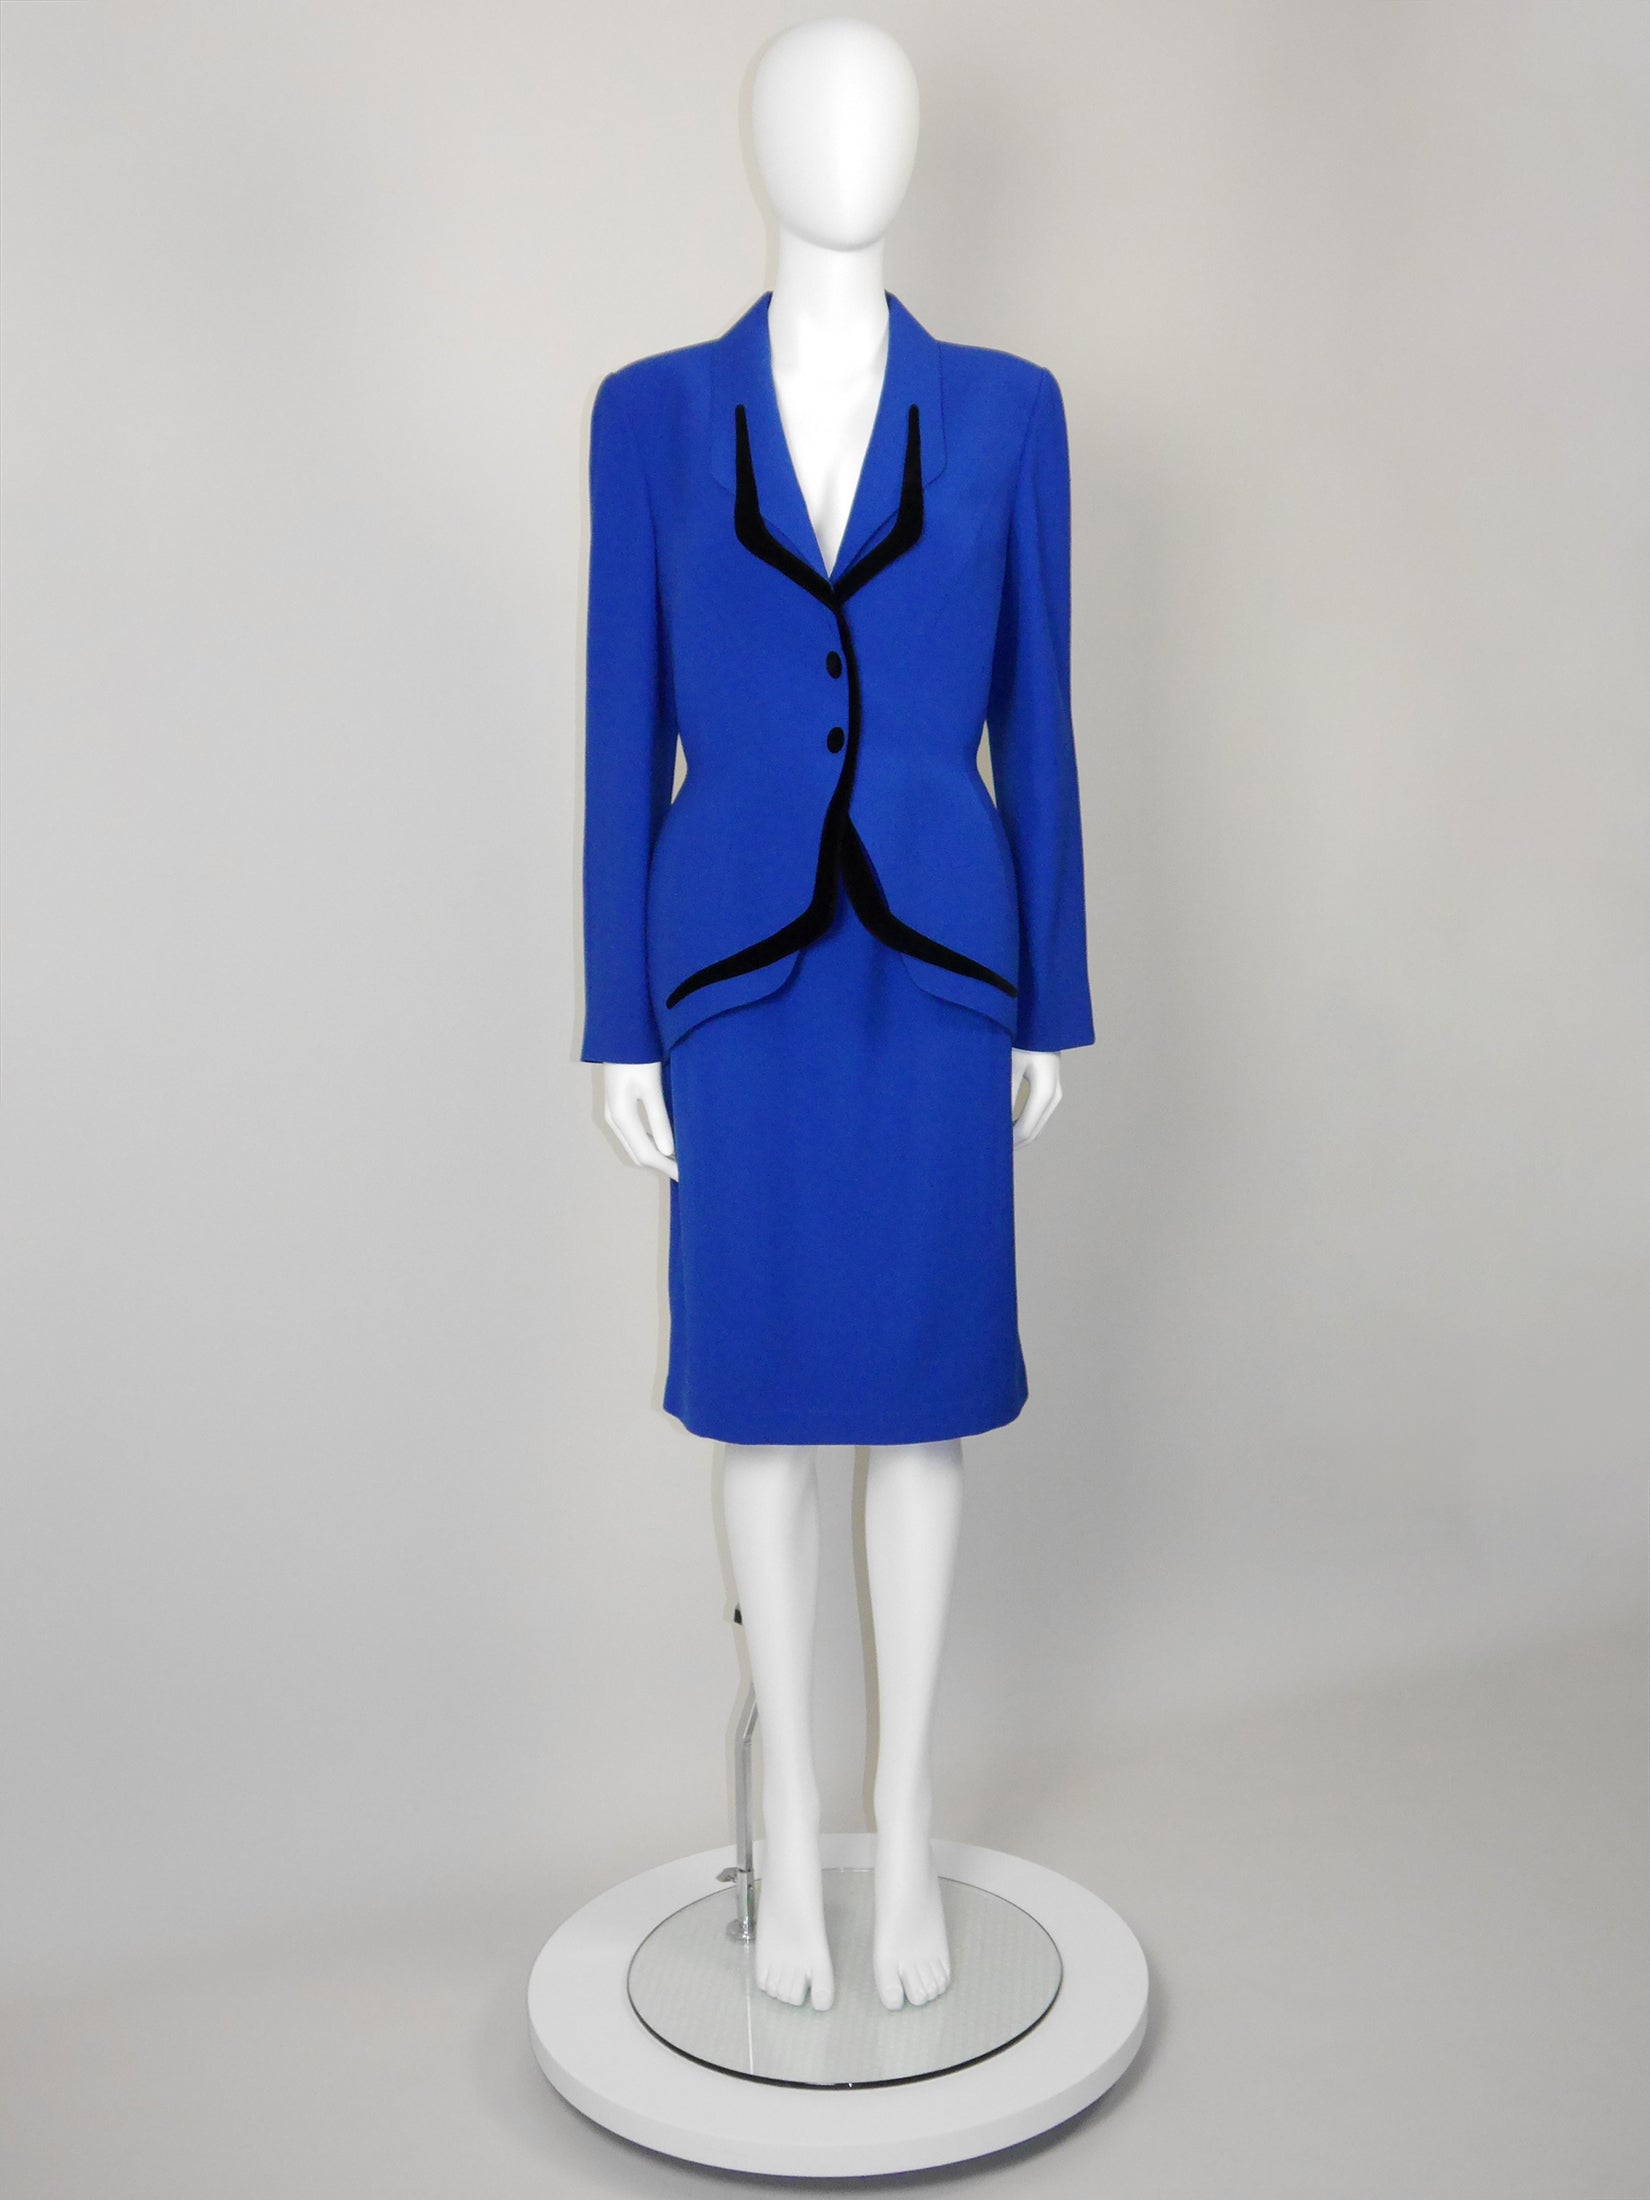 THIERRY MUGLER 1980s 1990s Vintage Electric Blue Jacket & Skirt 